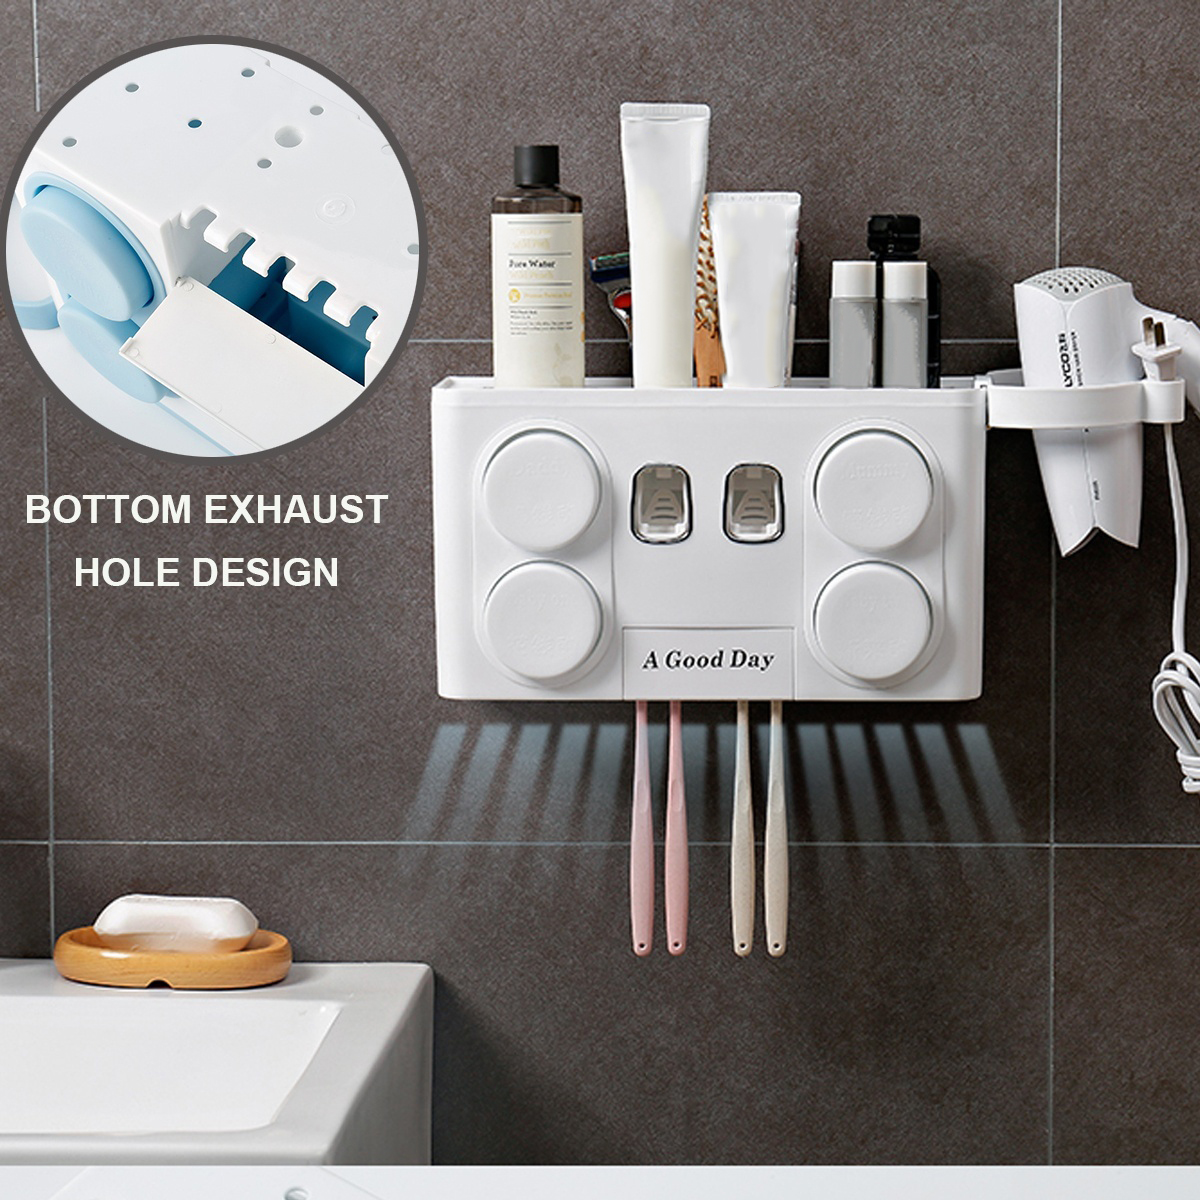 Multifunctional-Automatic-Toothpaste-Squeezer-Set-Wall-Mount-Suction-Cup-Toothbrush-Holder-Bathroom--1555695-5